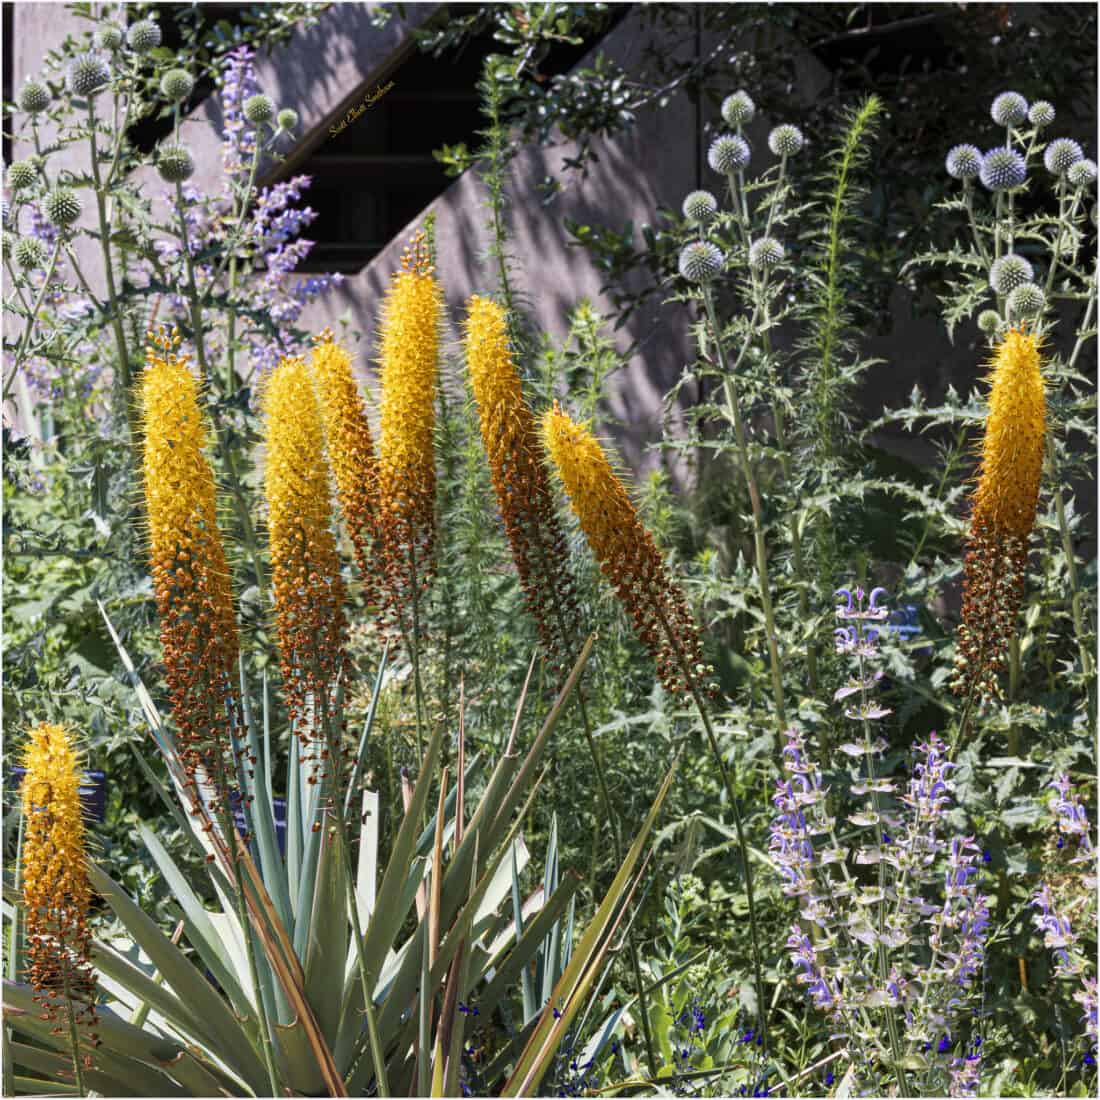 Foxtail Lilies with yucca, echinops and catmint